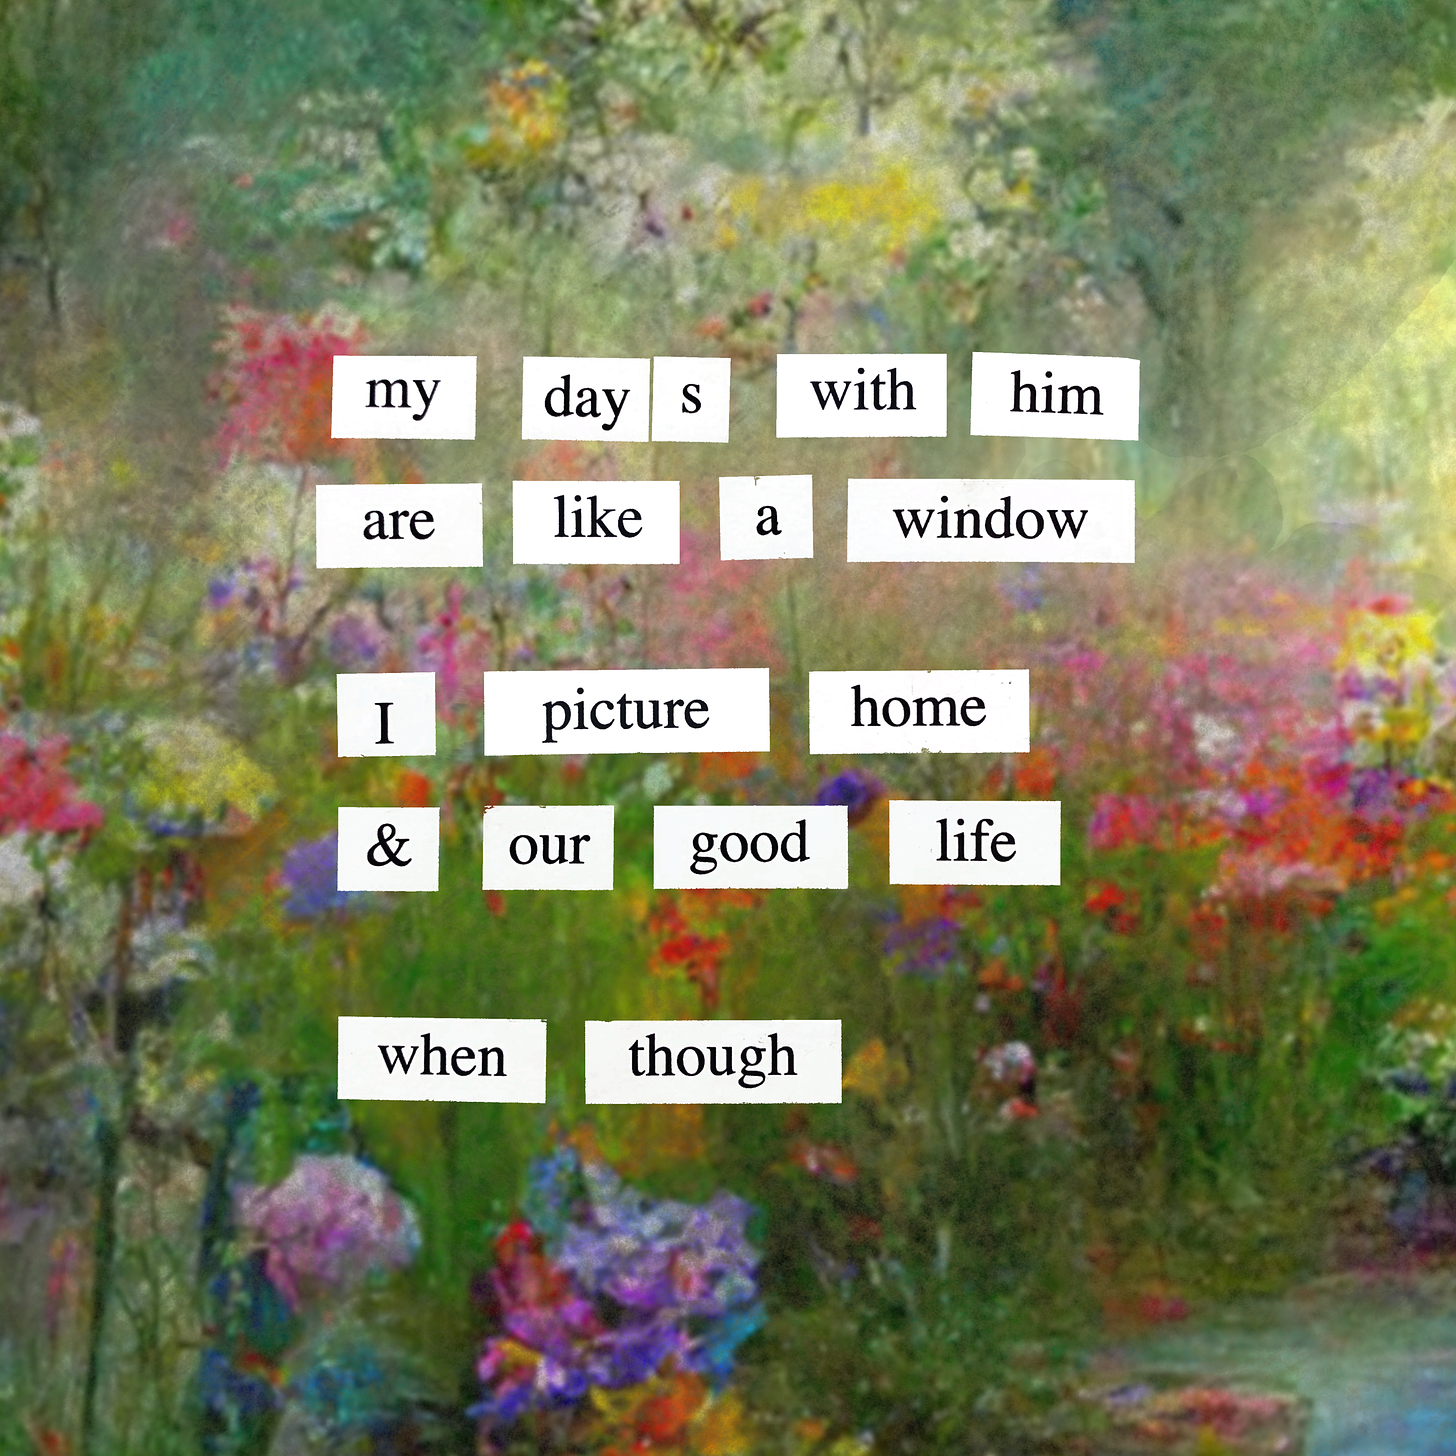 A poem made from magnetic poetry that says: "my days with him are like a window / I picture home & our good life / when though" A bright, multi-colored floral garden painting is in the background. 